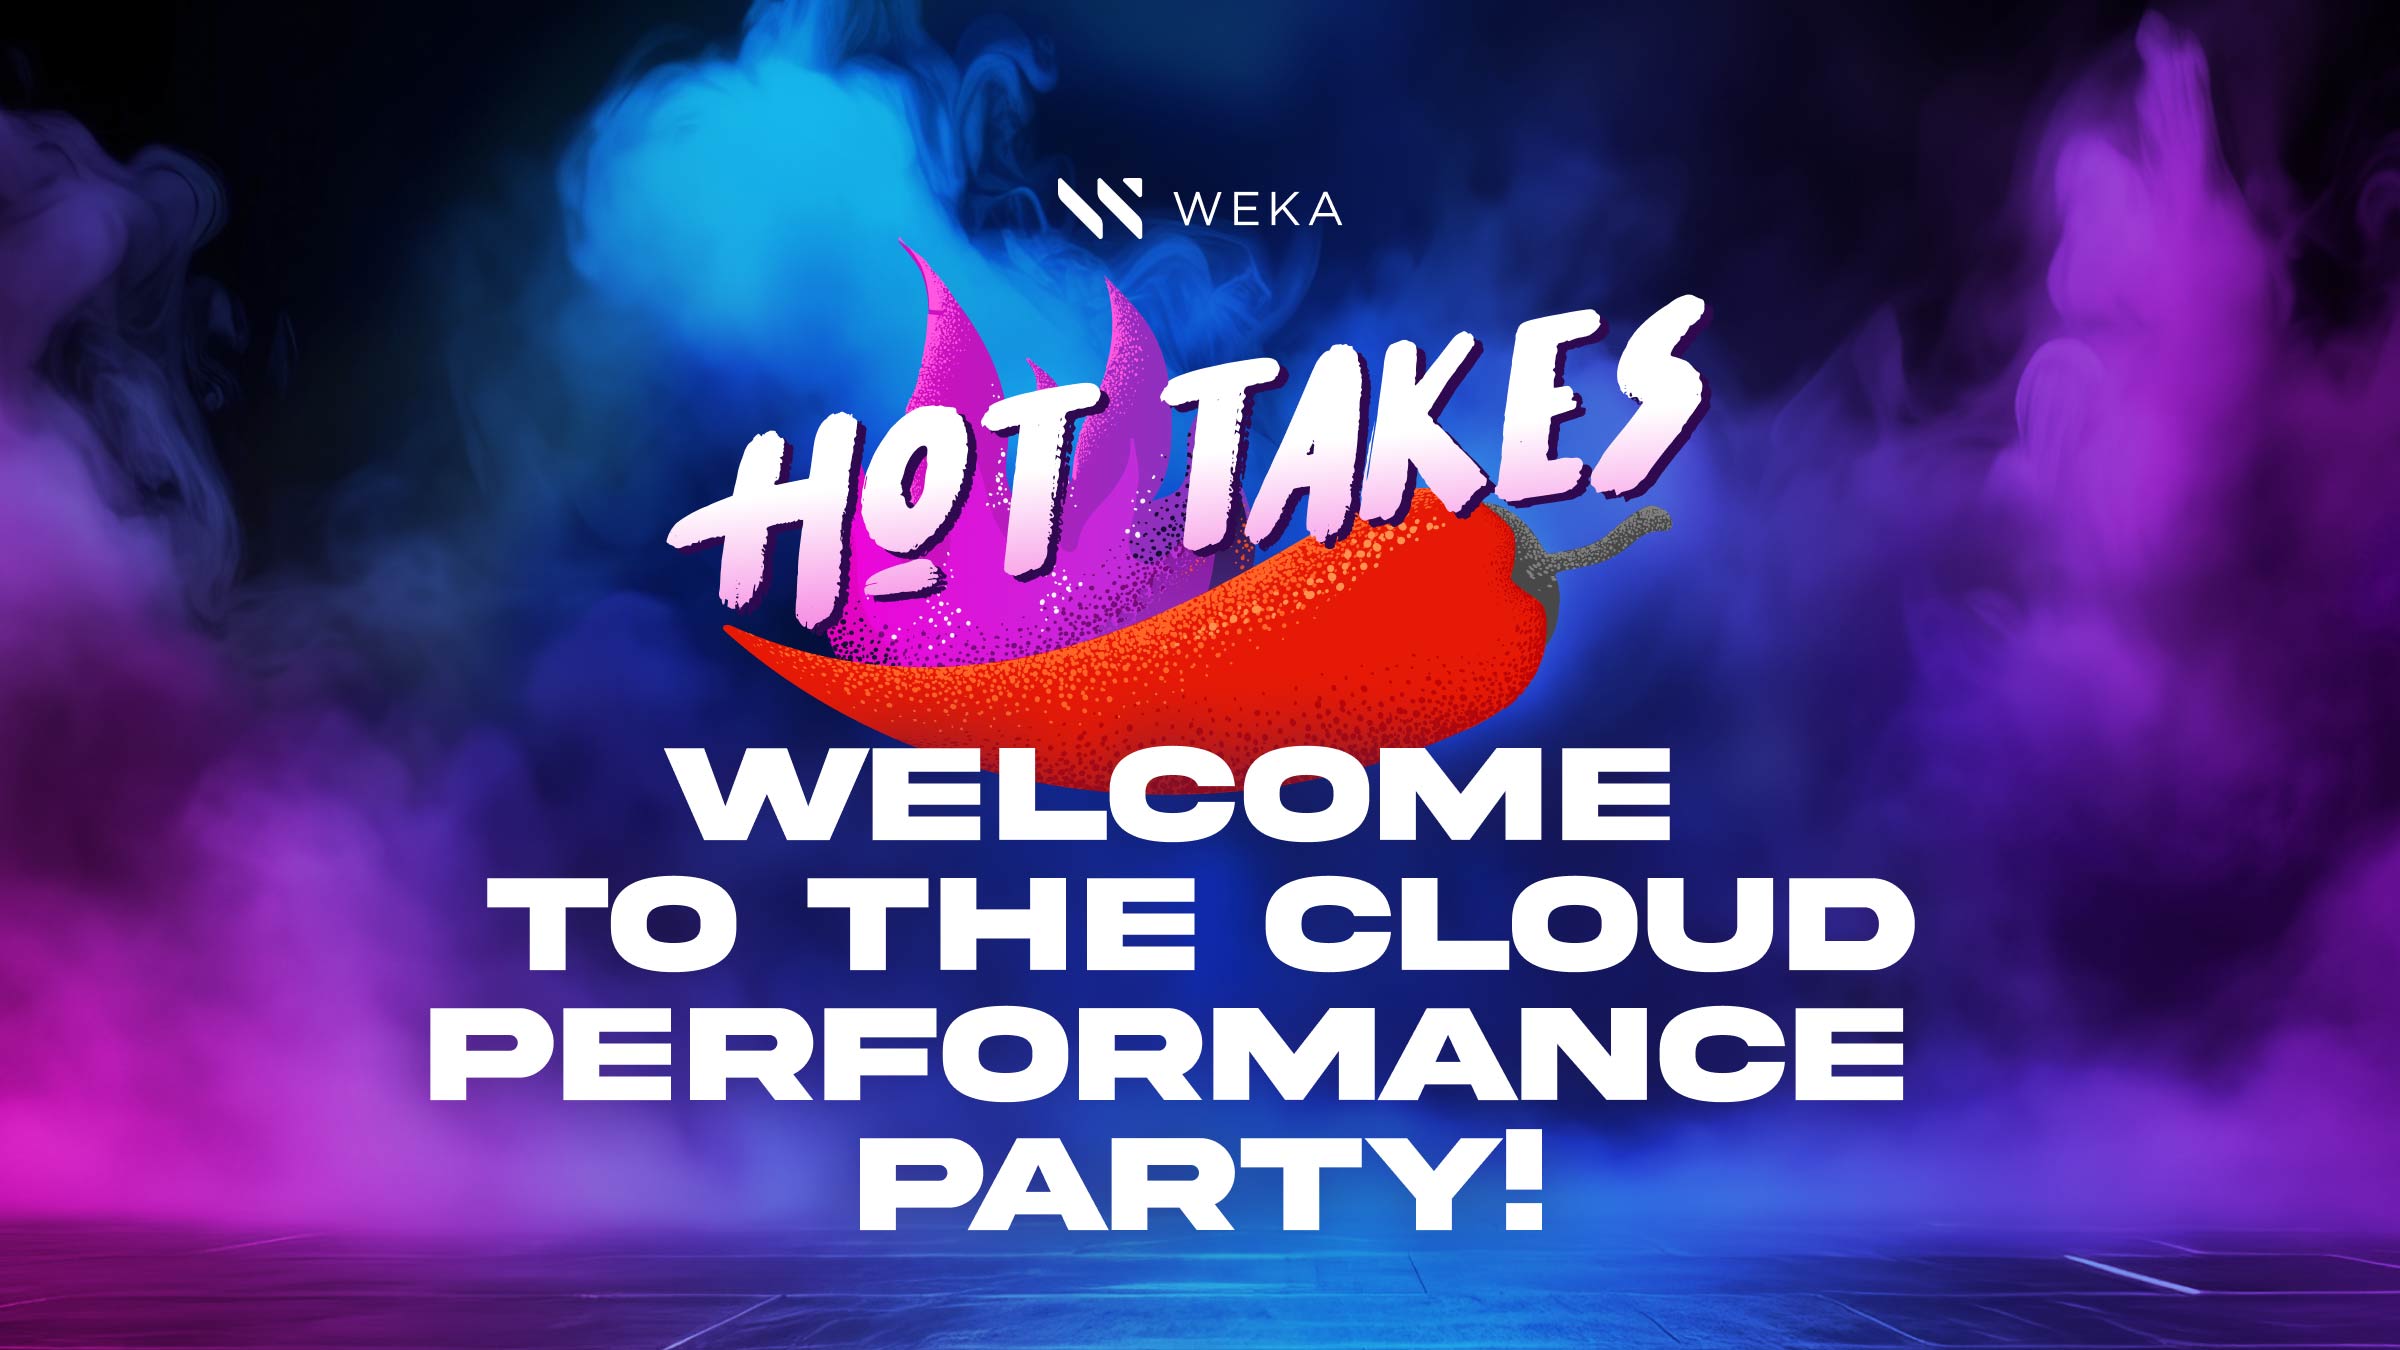 Hot Take: Welcome to the Cloud Performance Party!